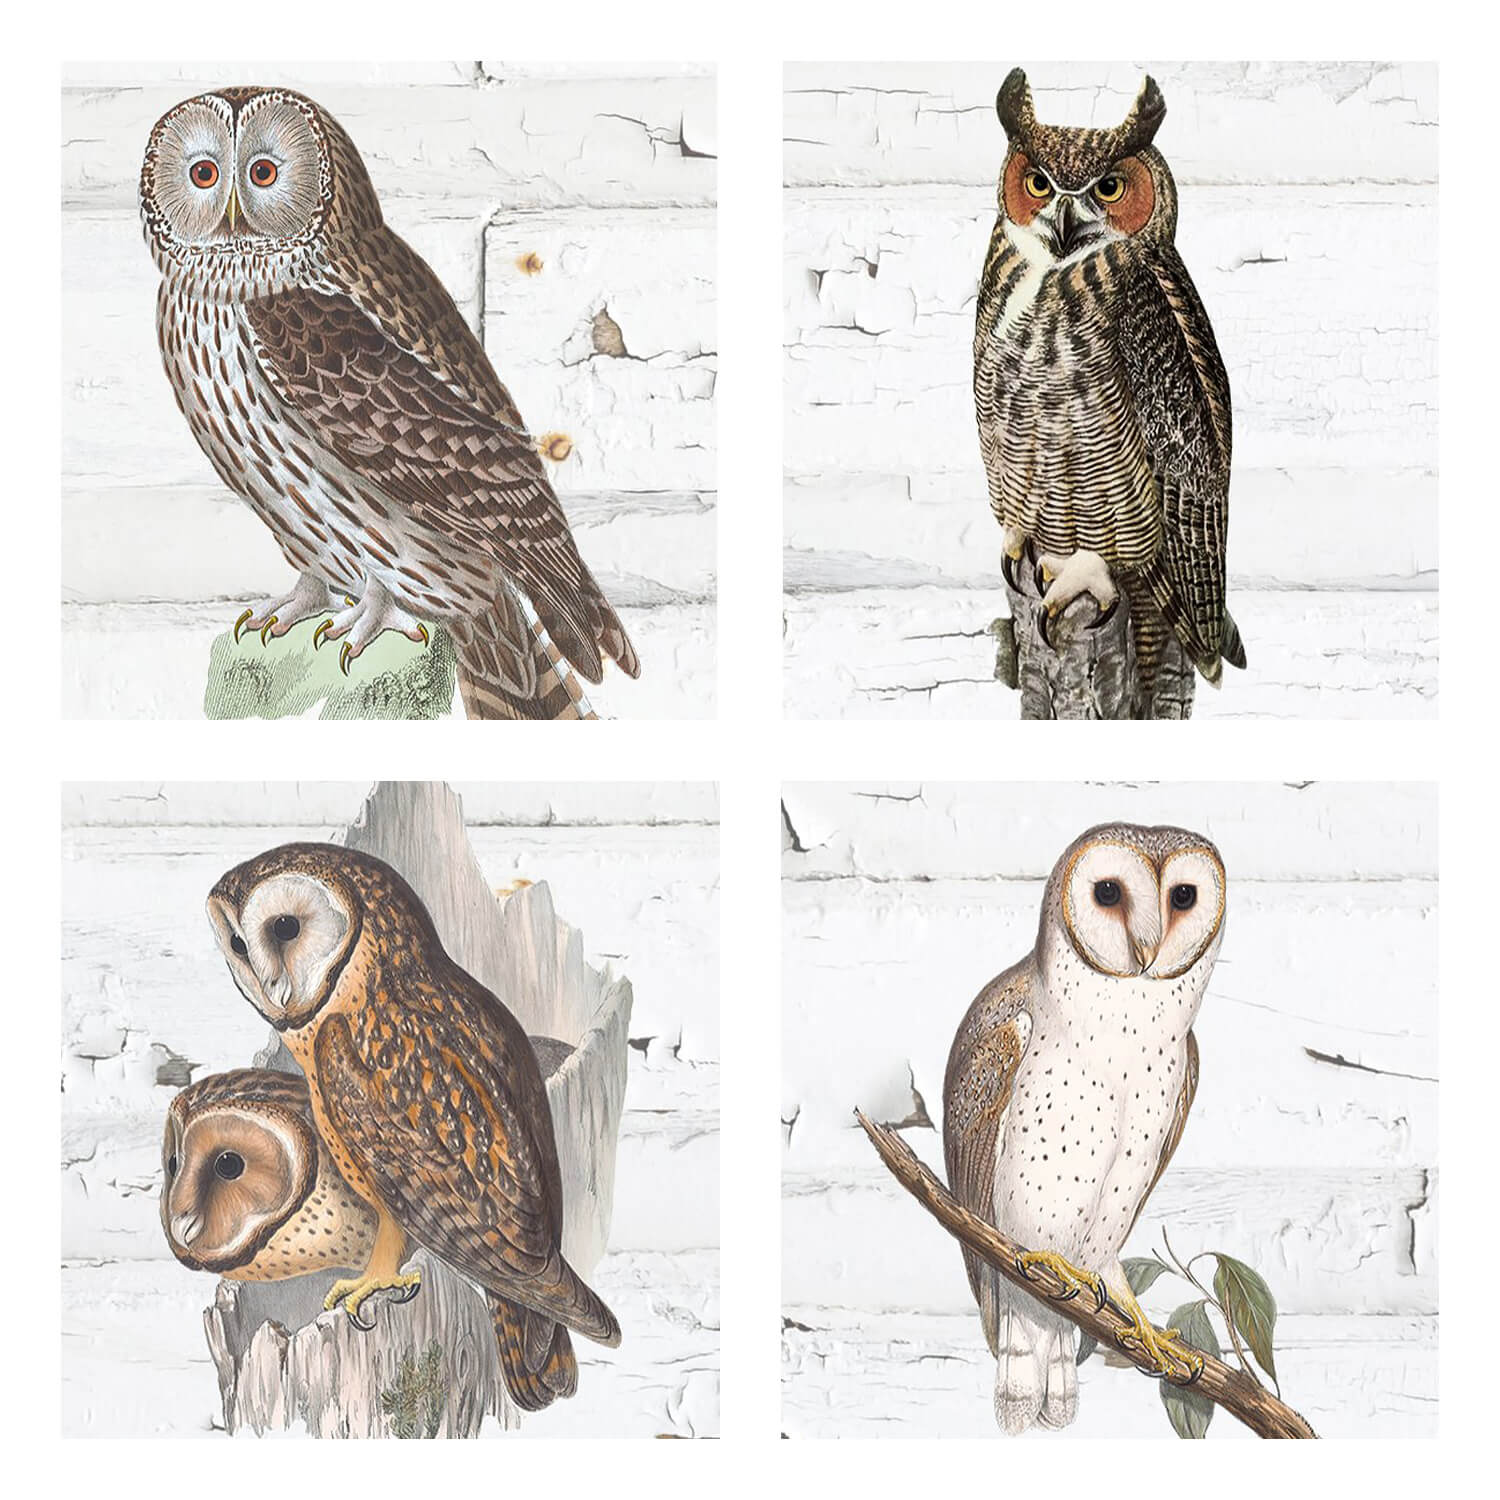 Four different owls in the image.